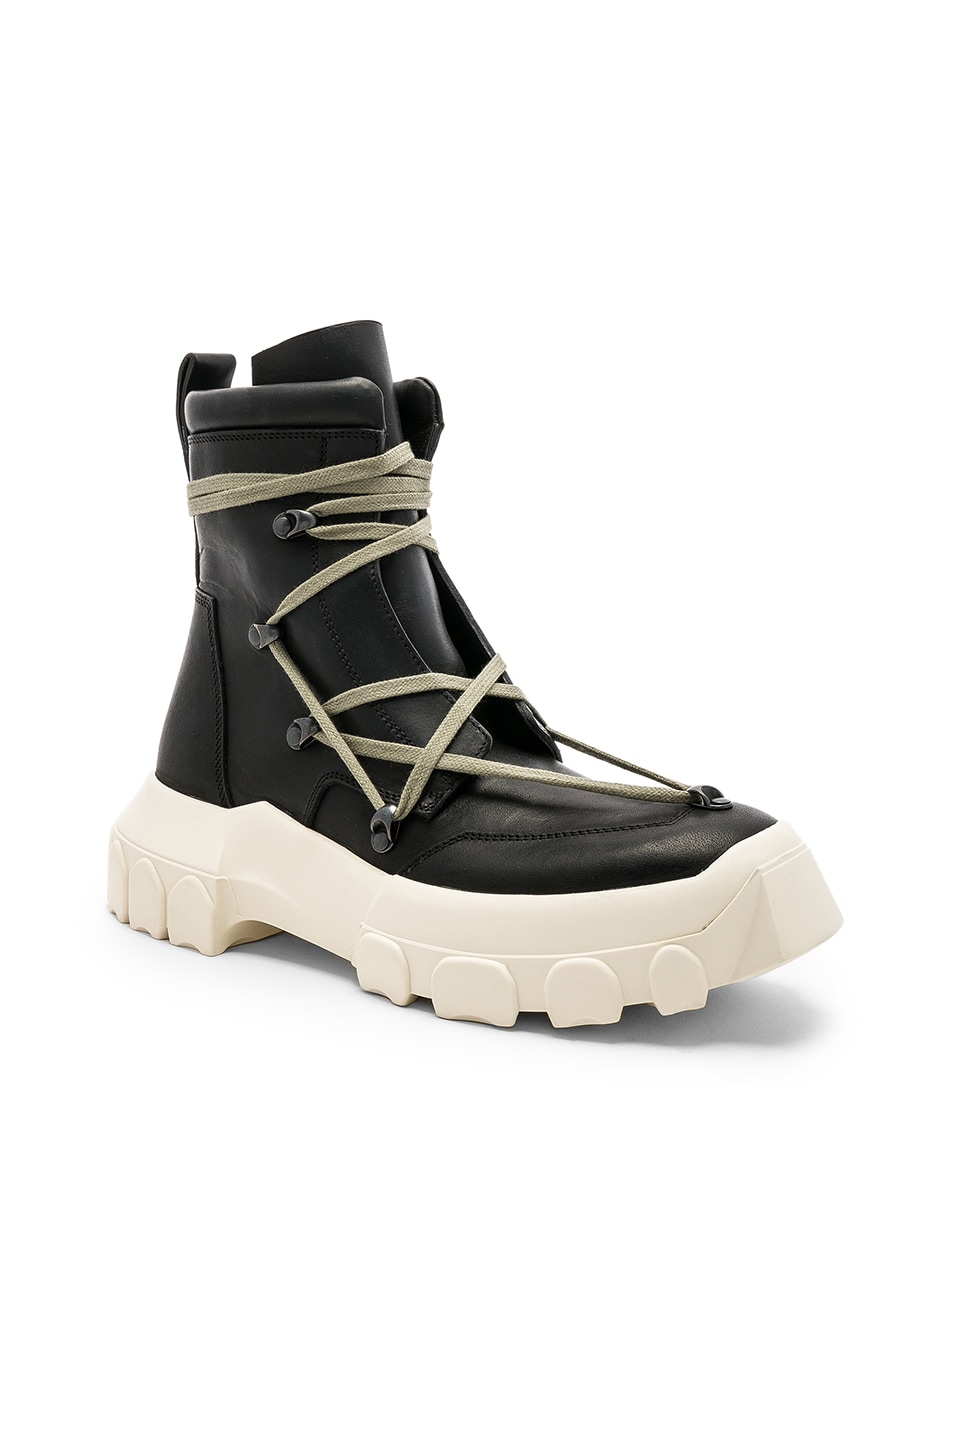 Rick Owens Leather Lace Up Hiking Boots in Black & Milk | FWRD